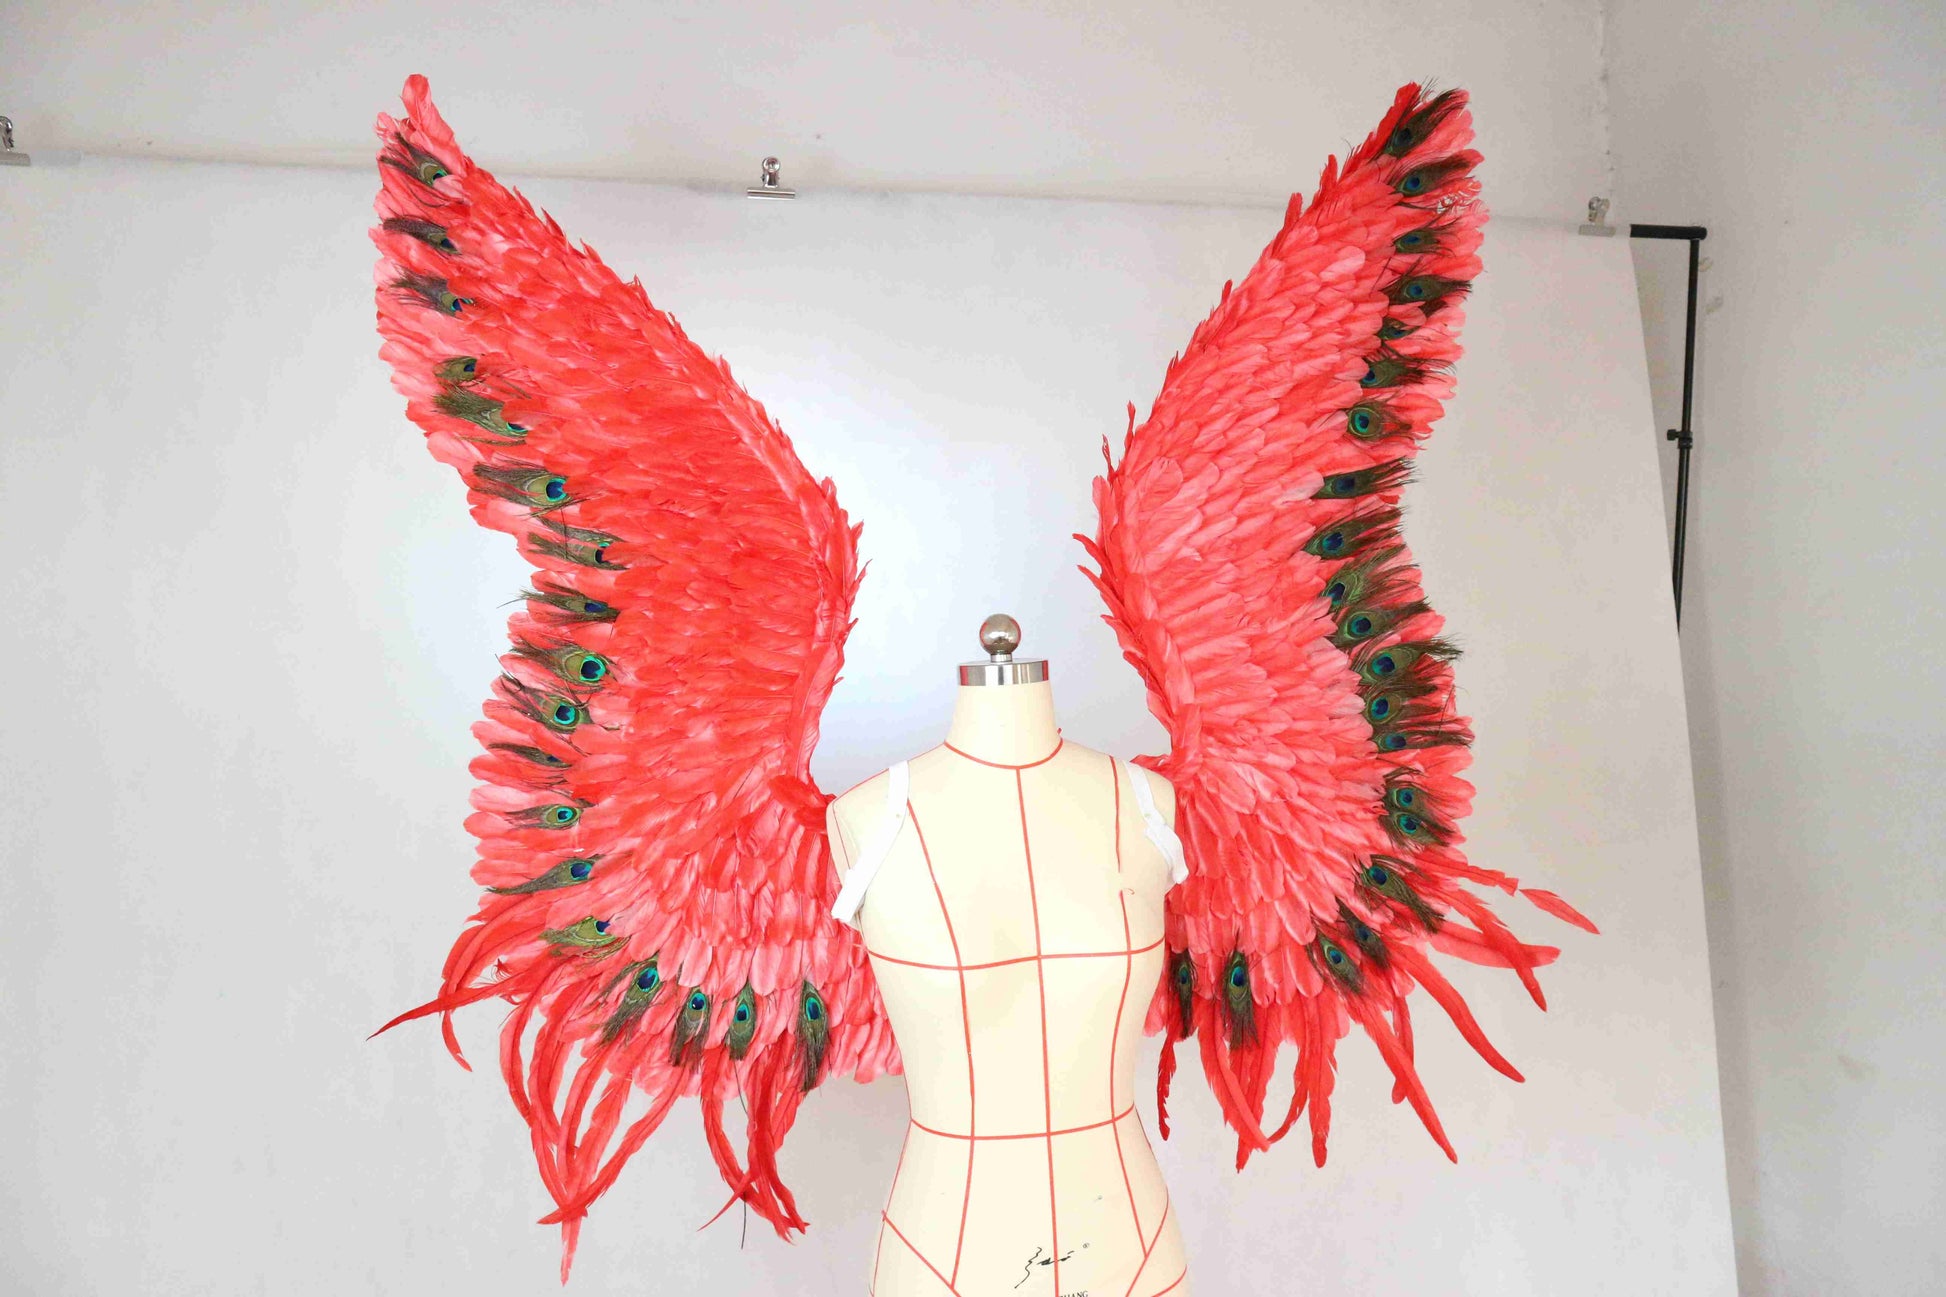 Our red peacock angel wings from the right side. Made from goose feathers and peacock feathers. Wings for angel wings costume. Suitable for photoshoots.